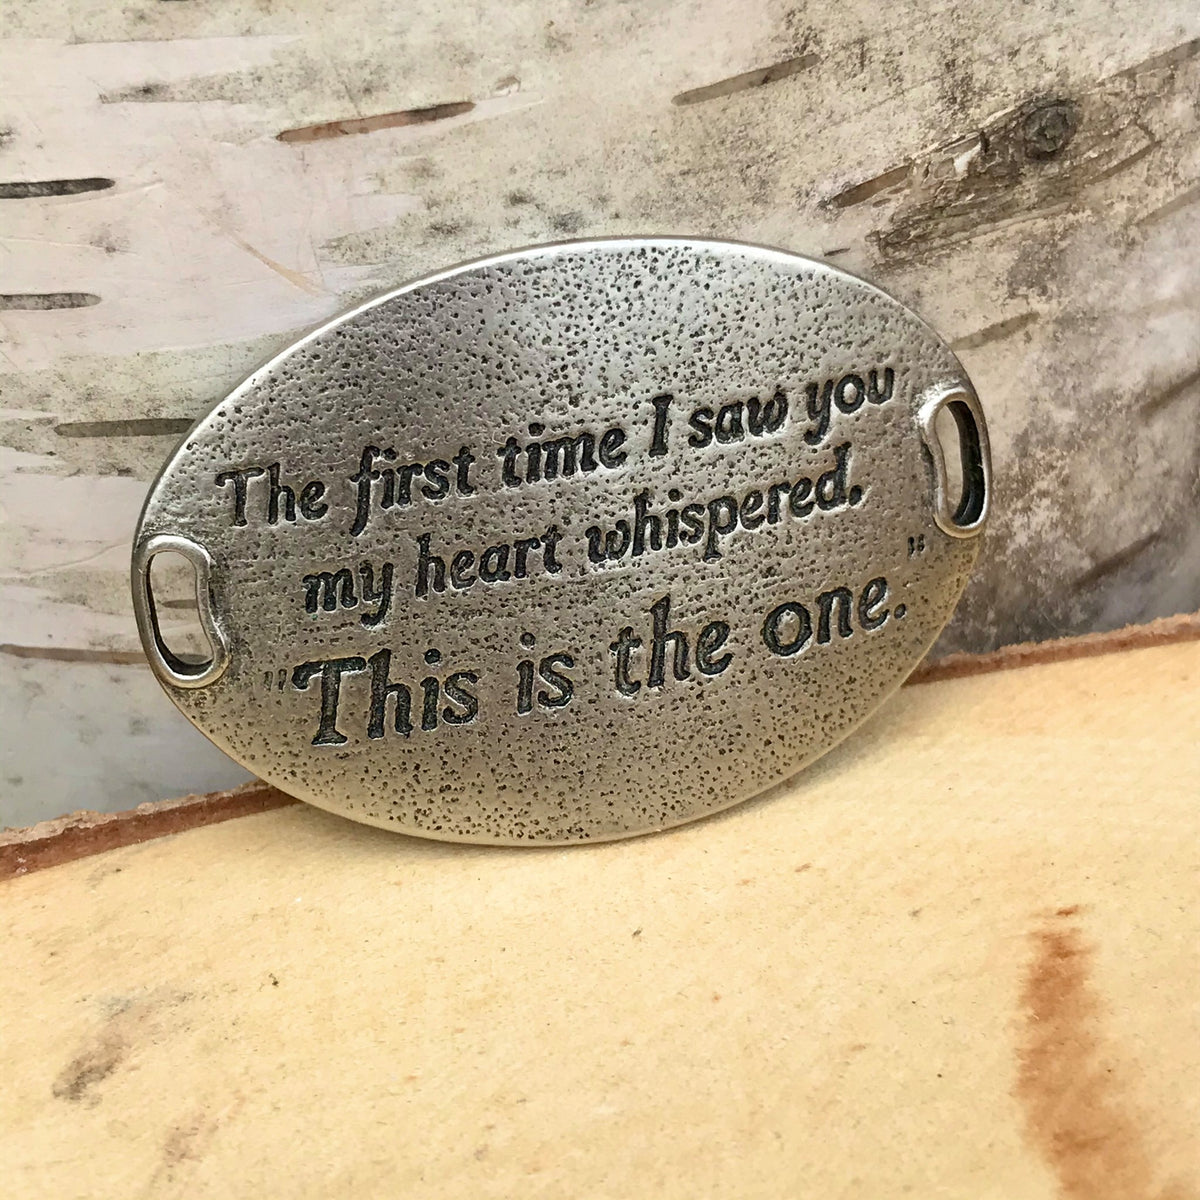 Oval shaped, antique silver finish Lenny & Eva bracelet sentiment that reads, "The first time I saw you my heart whispered, 'This is the one.'"